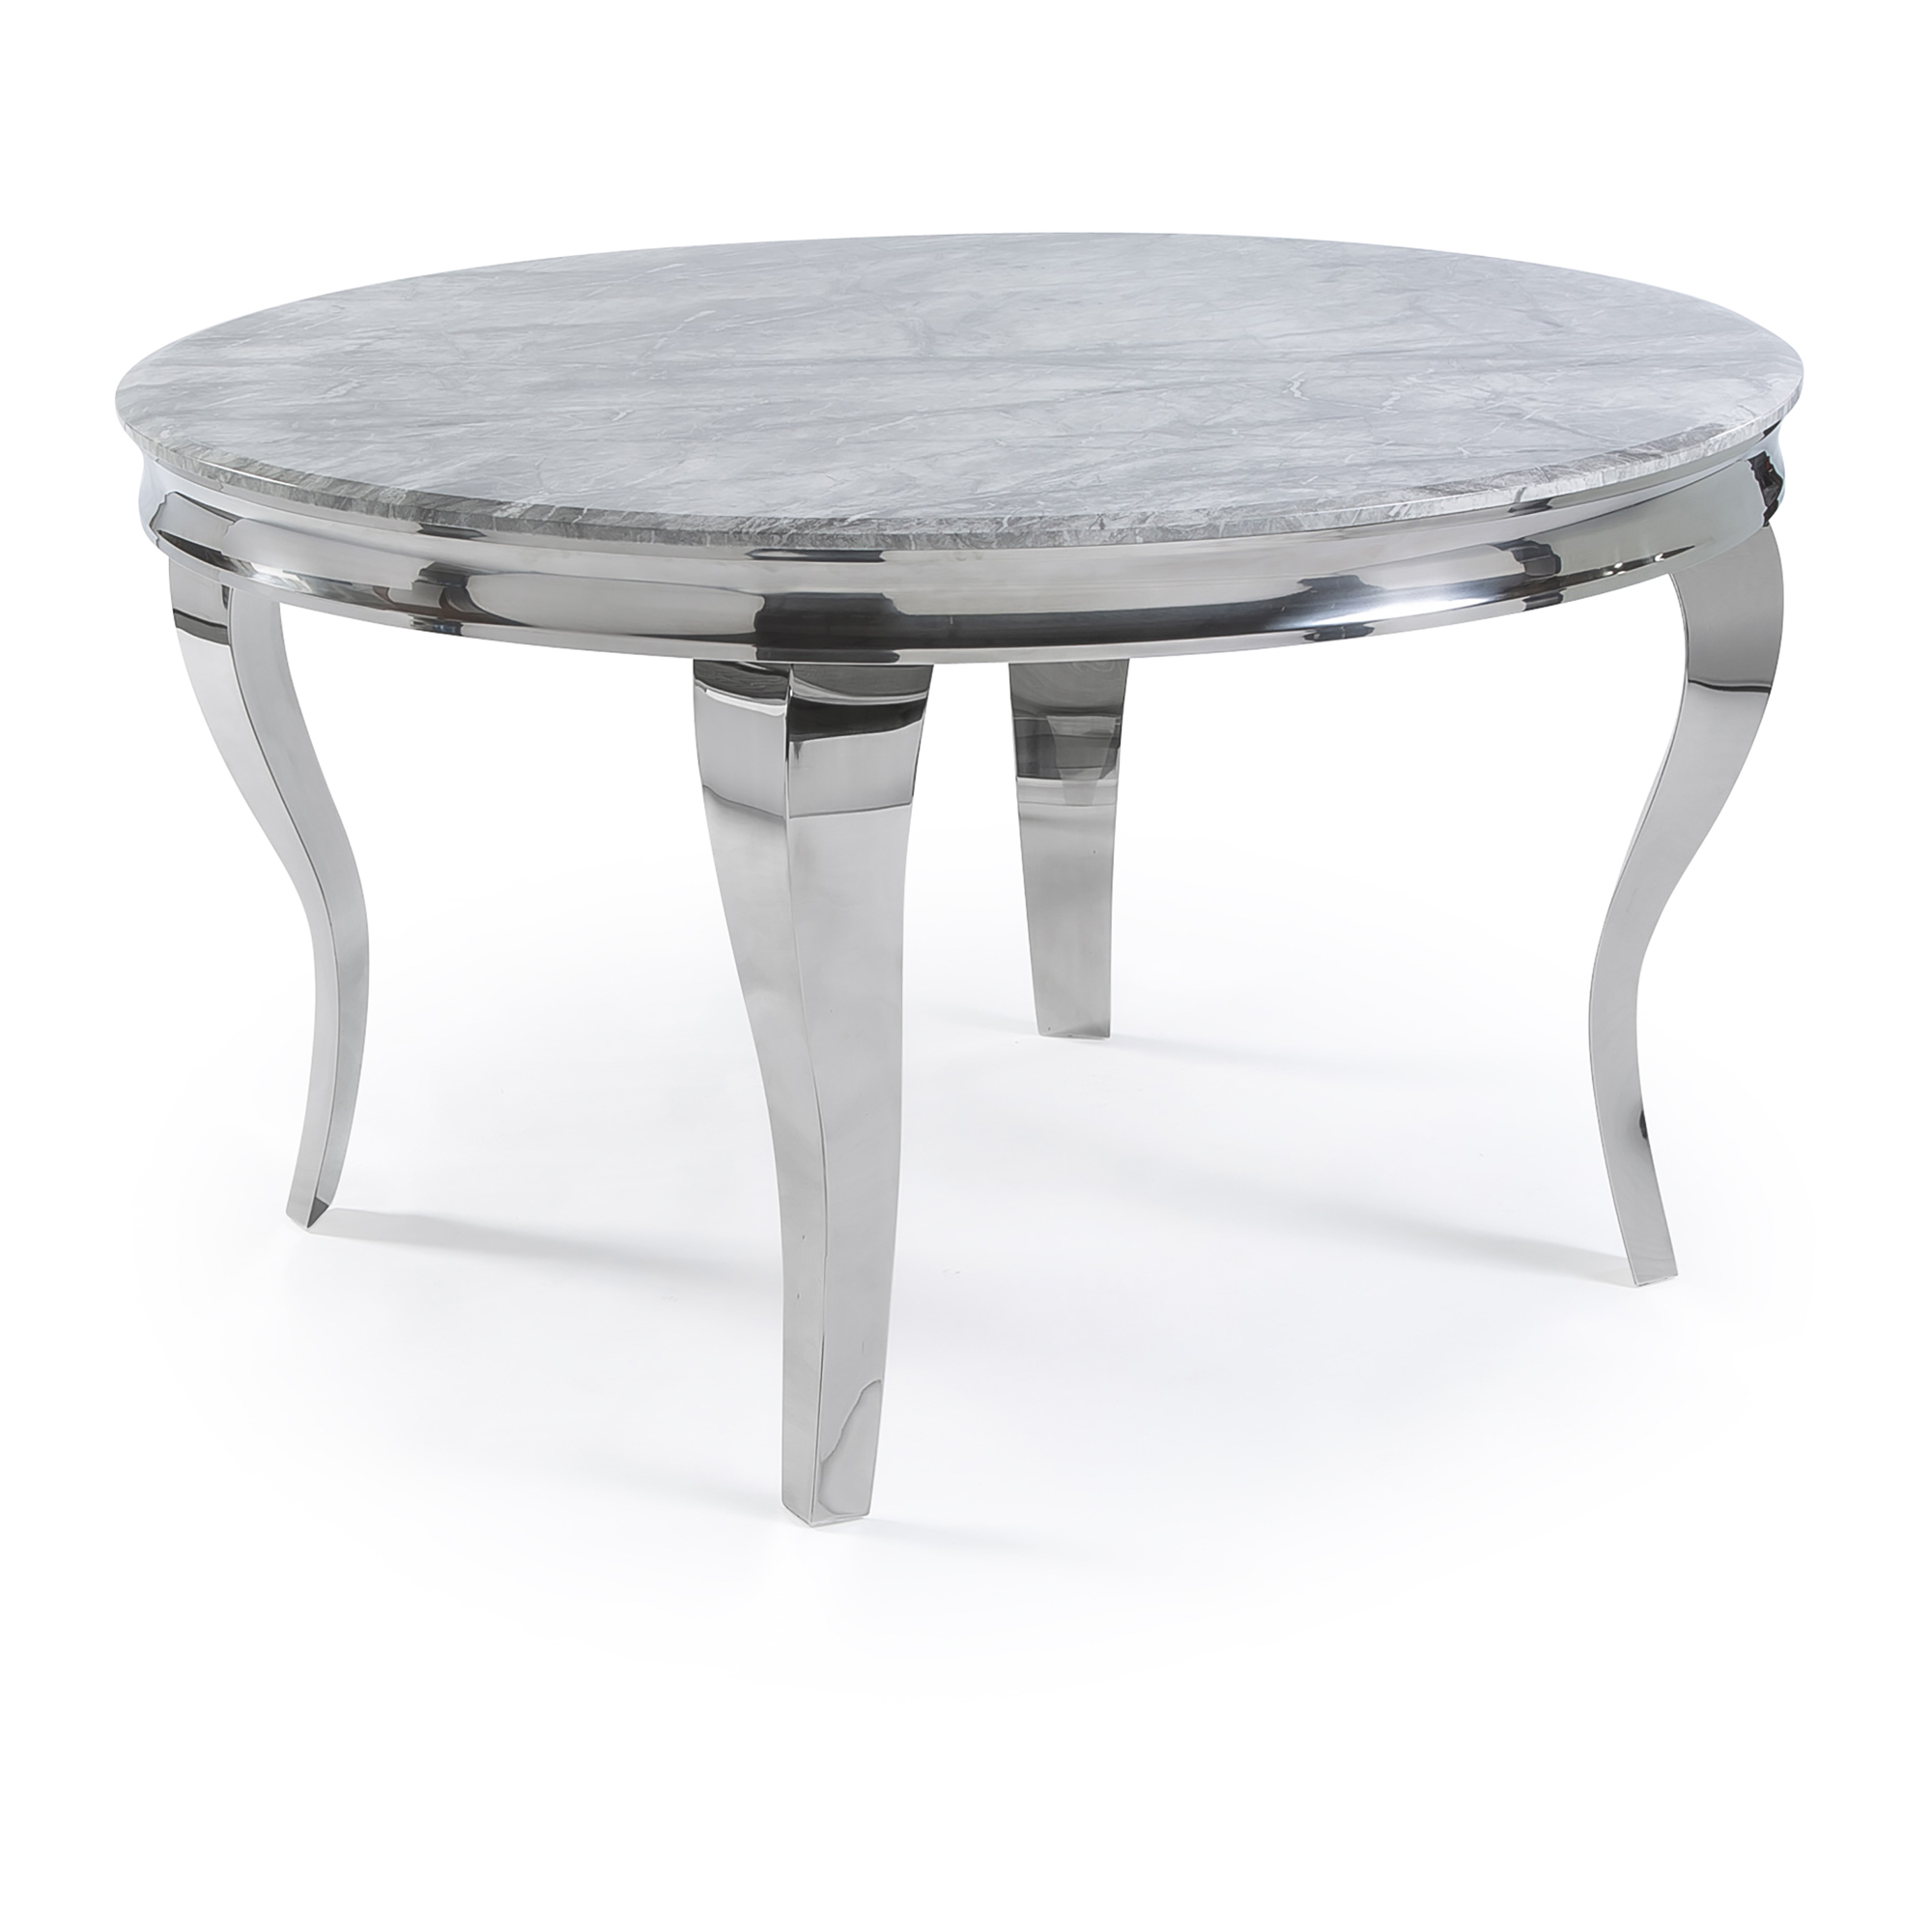 1.3m Circular Louis Polished Steel Dining Grey Marble Table Set with 4 Dove Grey Brushed Velvet Dining Chair